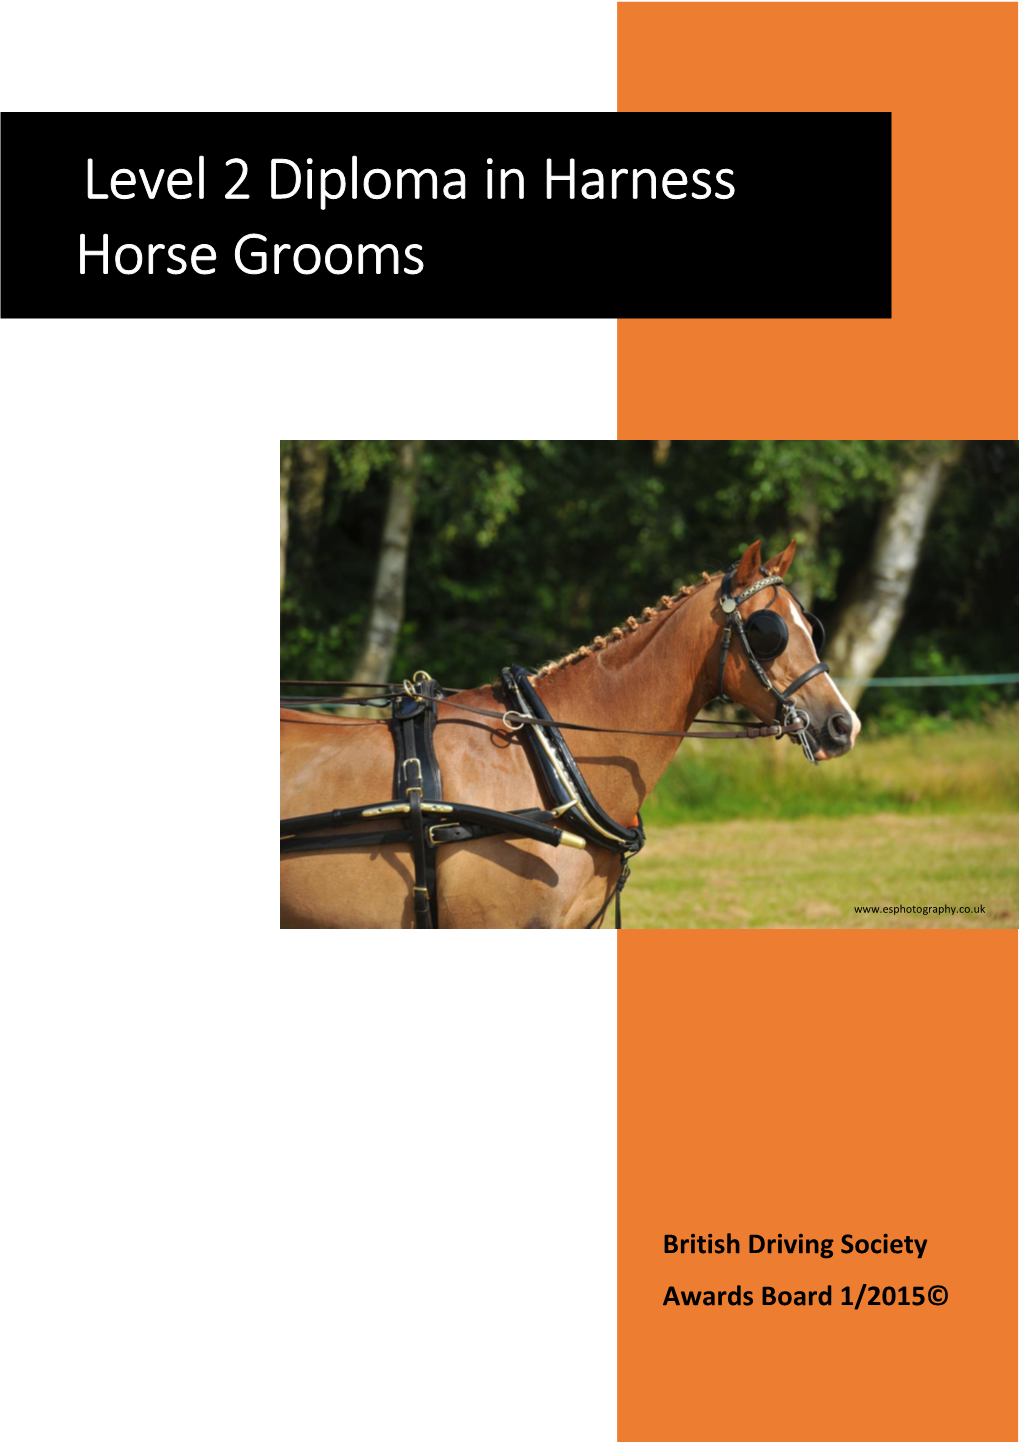 Level 2 Diploma in Harness Horse Grooms